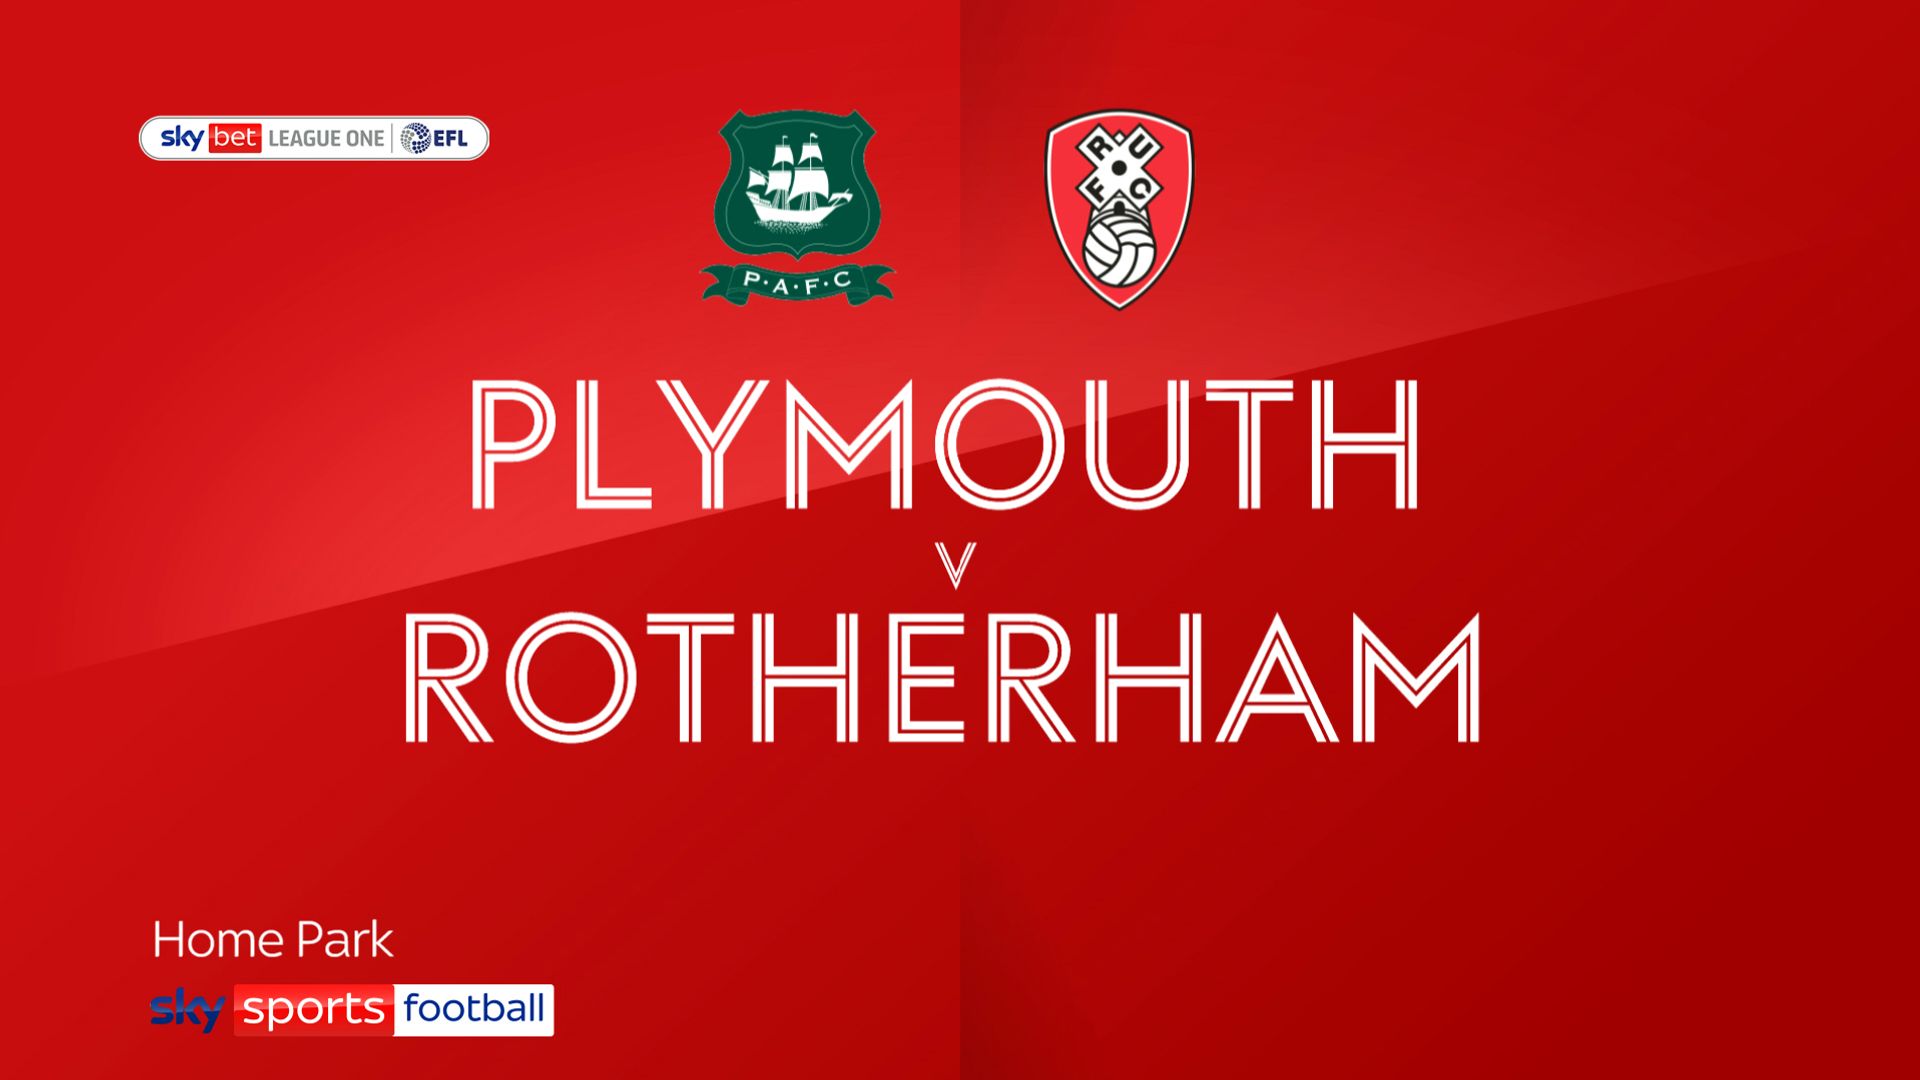 Smith scores again as Rotherham move nine clear